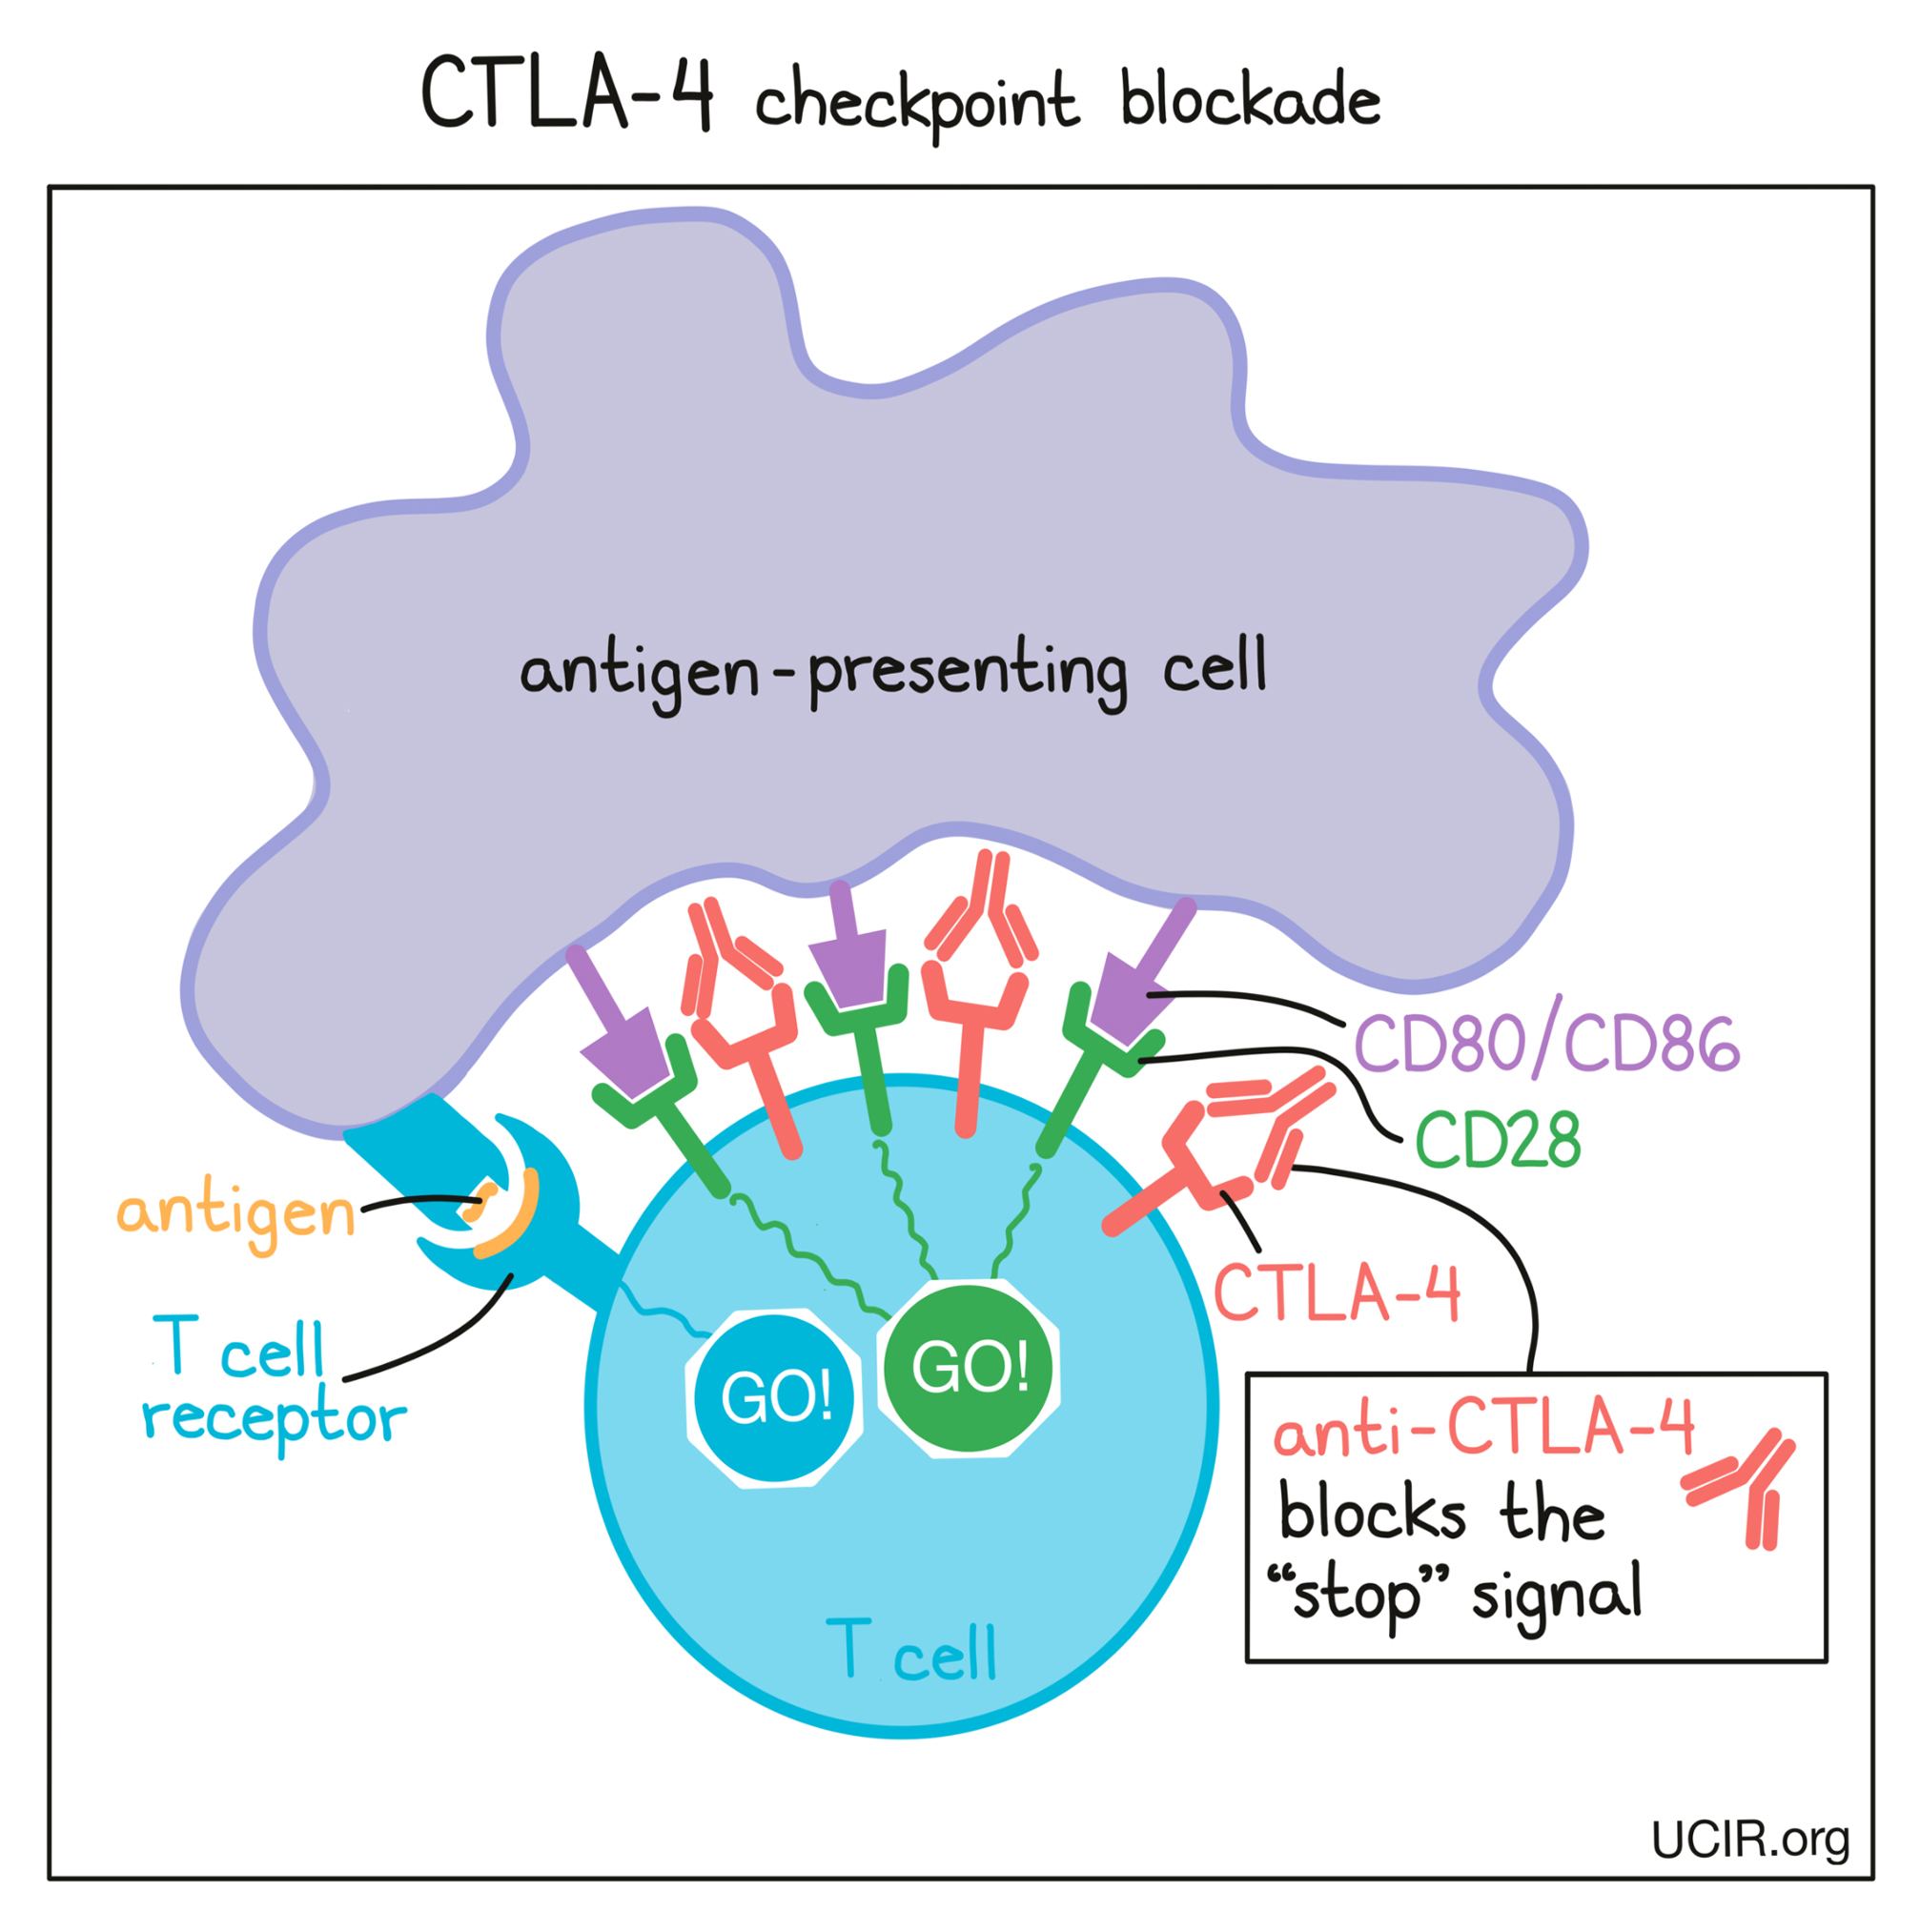  Illustration that shows how CTLA-4 checkpoint blockade works (multiple images)